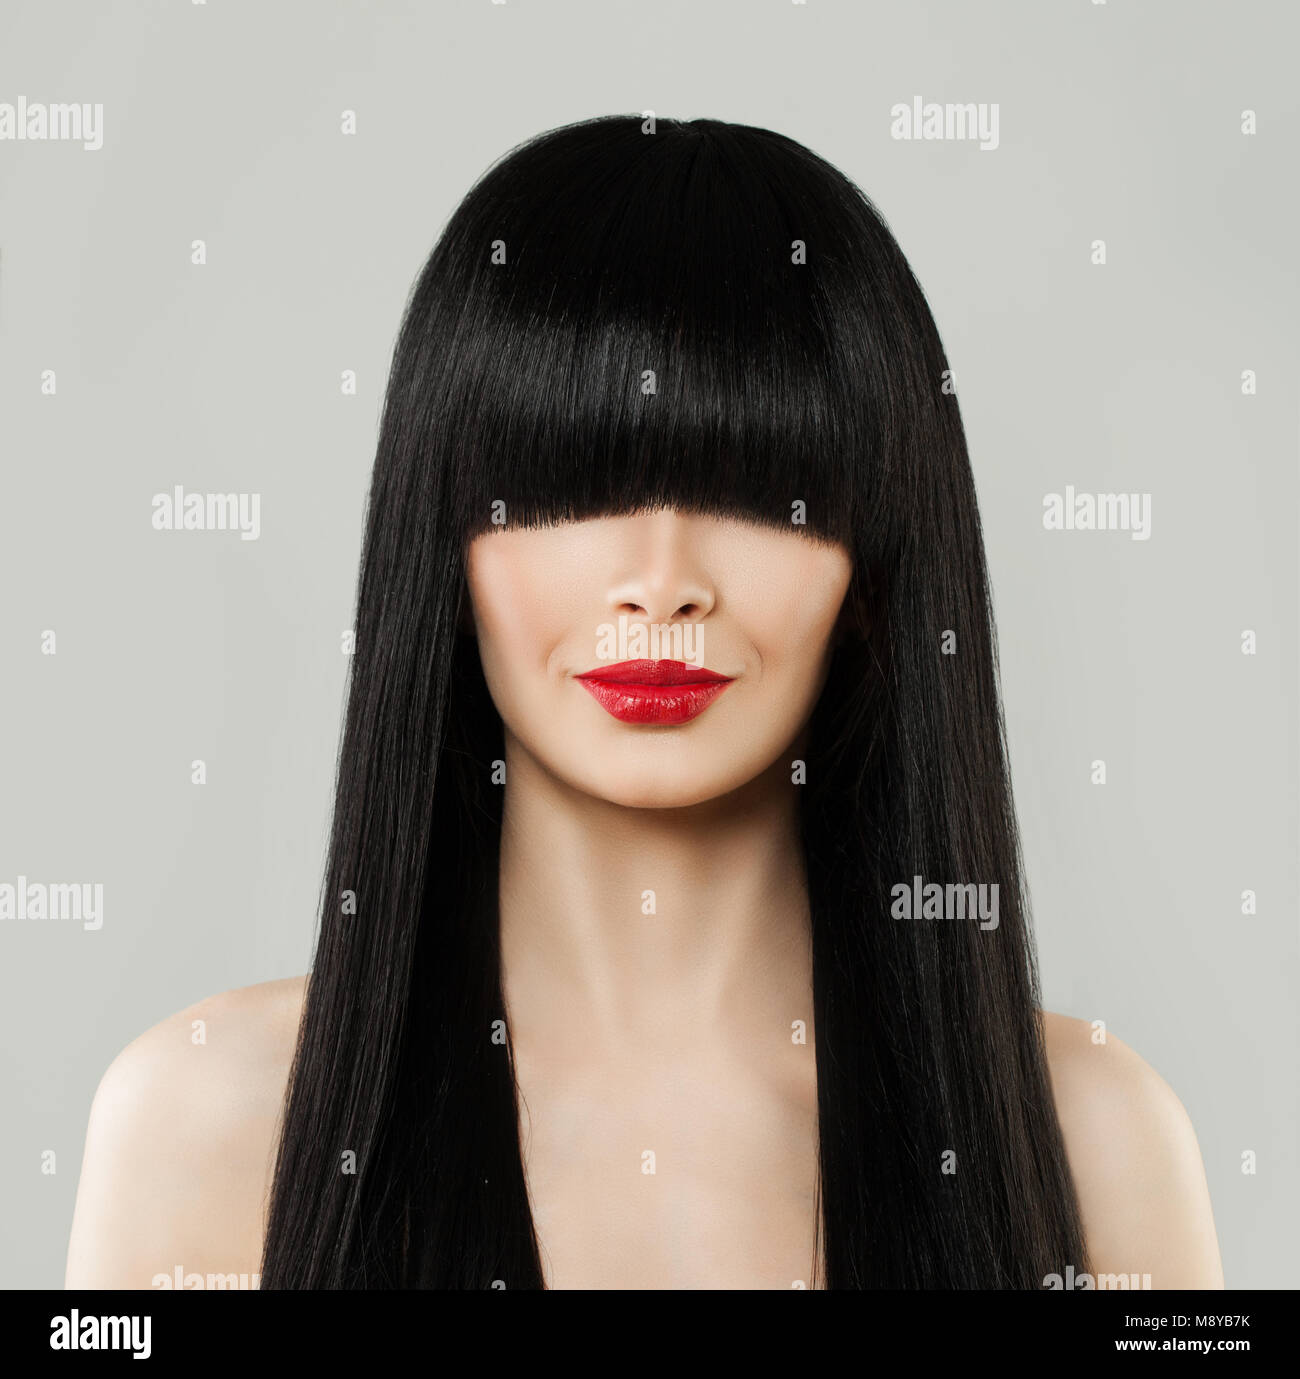 Beautiful Hairstyle Woman Portrait. Model Girl with Long Black Hair and Red Lips Stock Photo